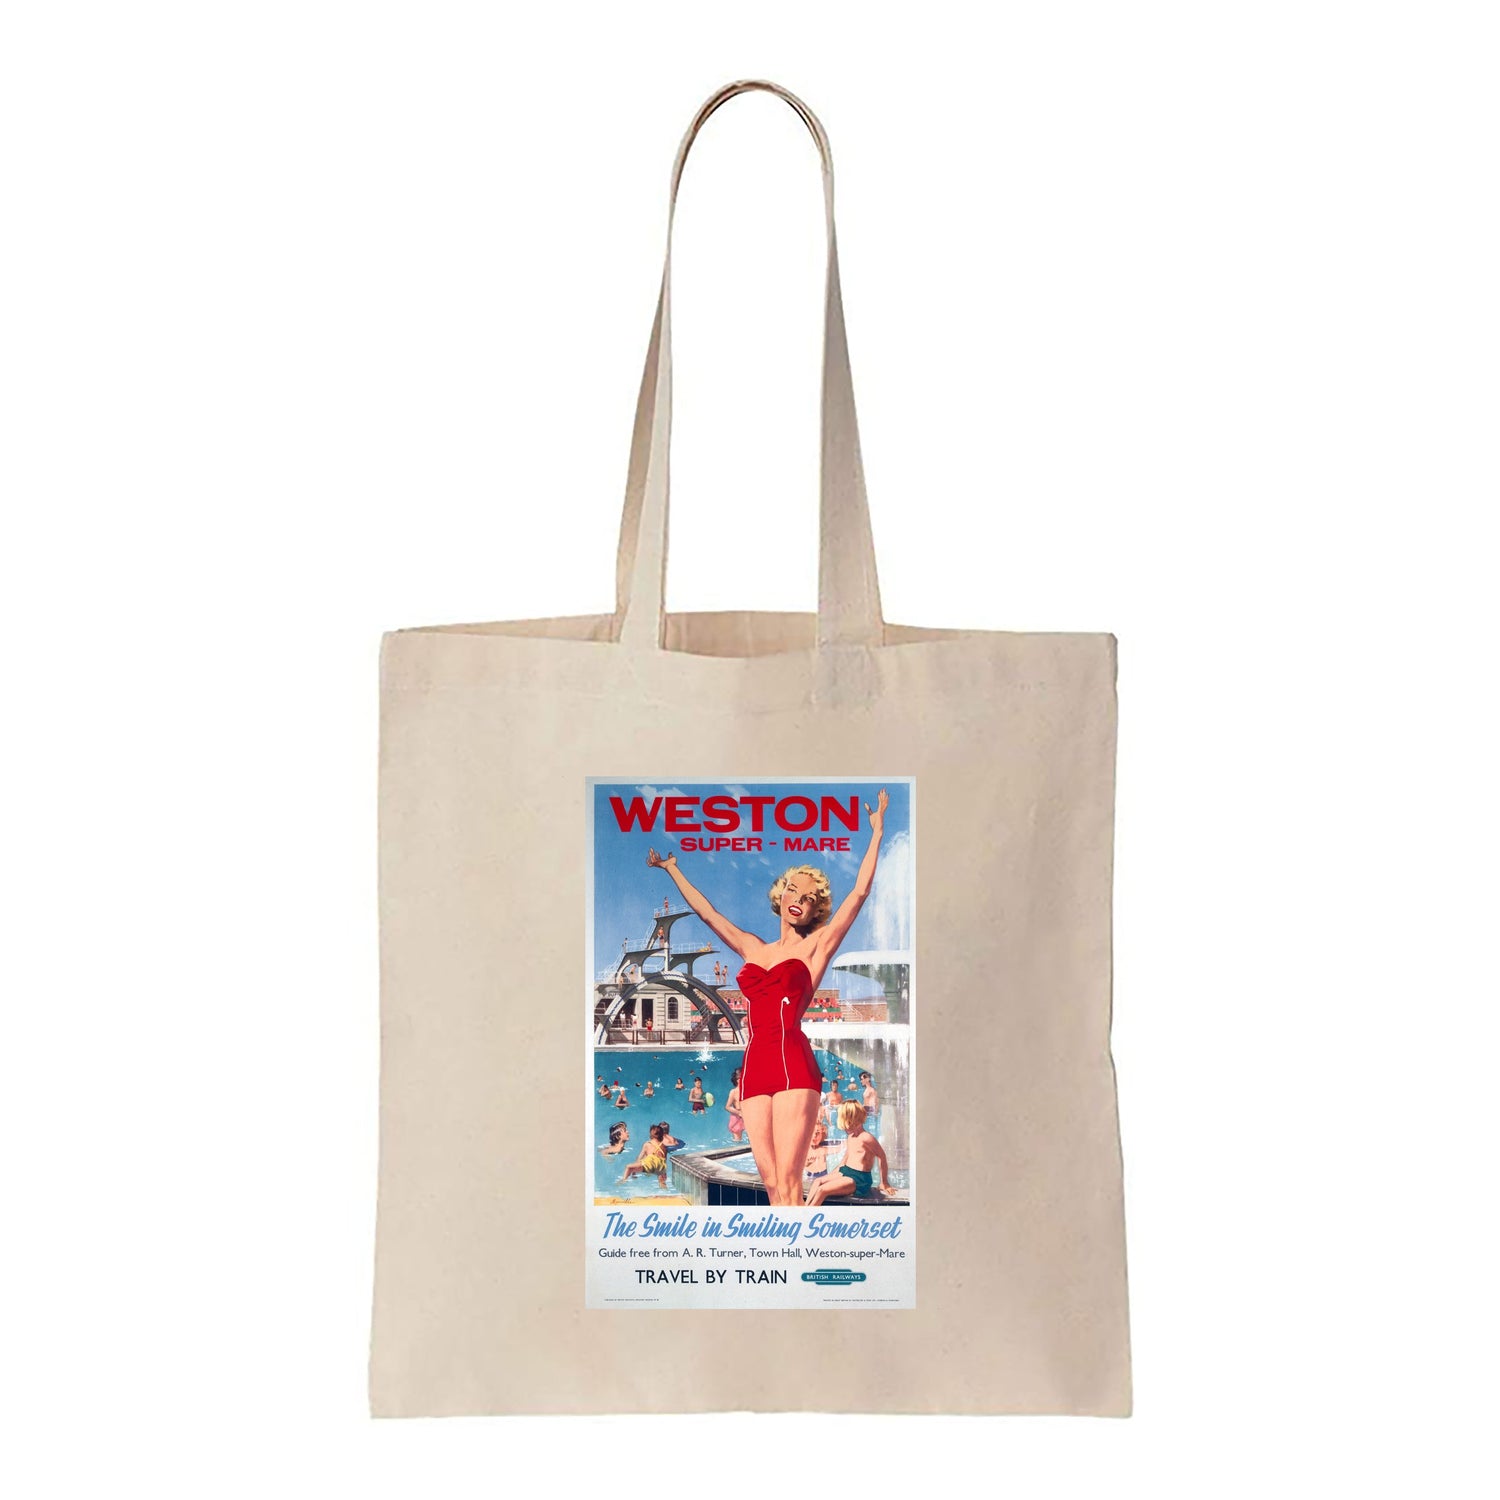 Weston-super-Mare - The smile in smiling Somerset - Canvas Tote Bag